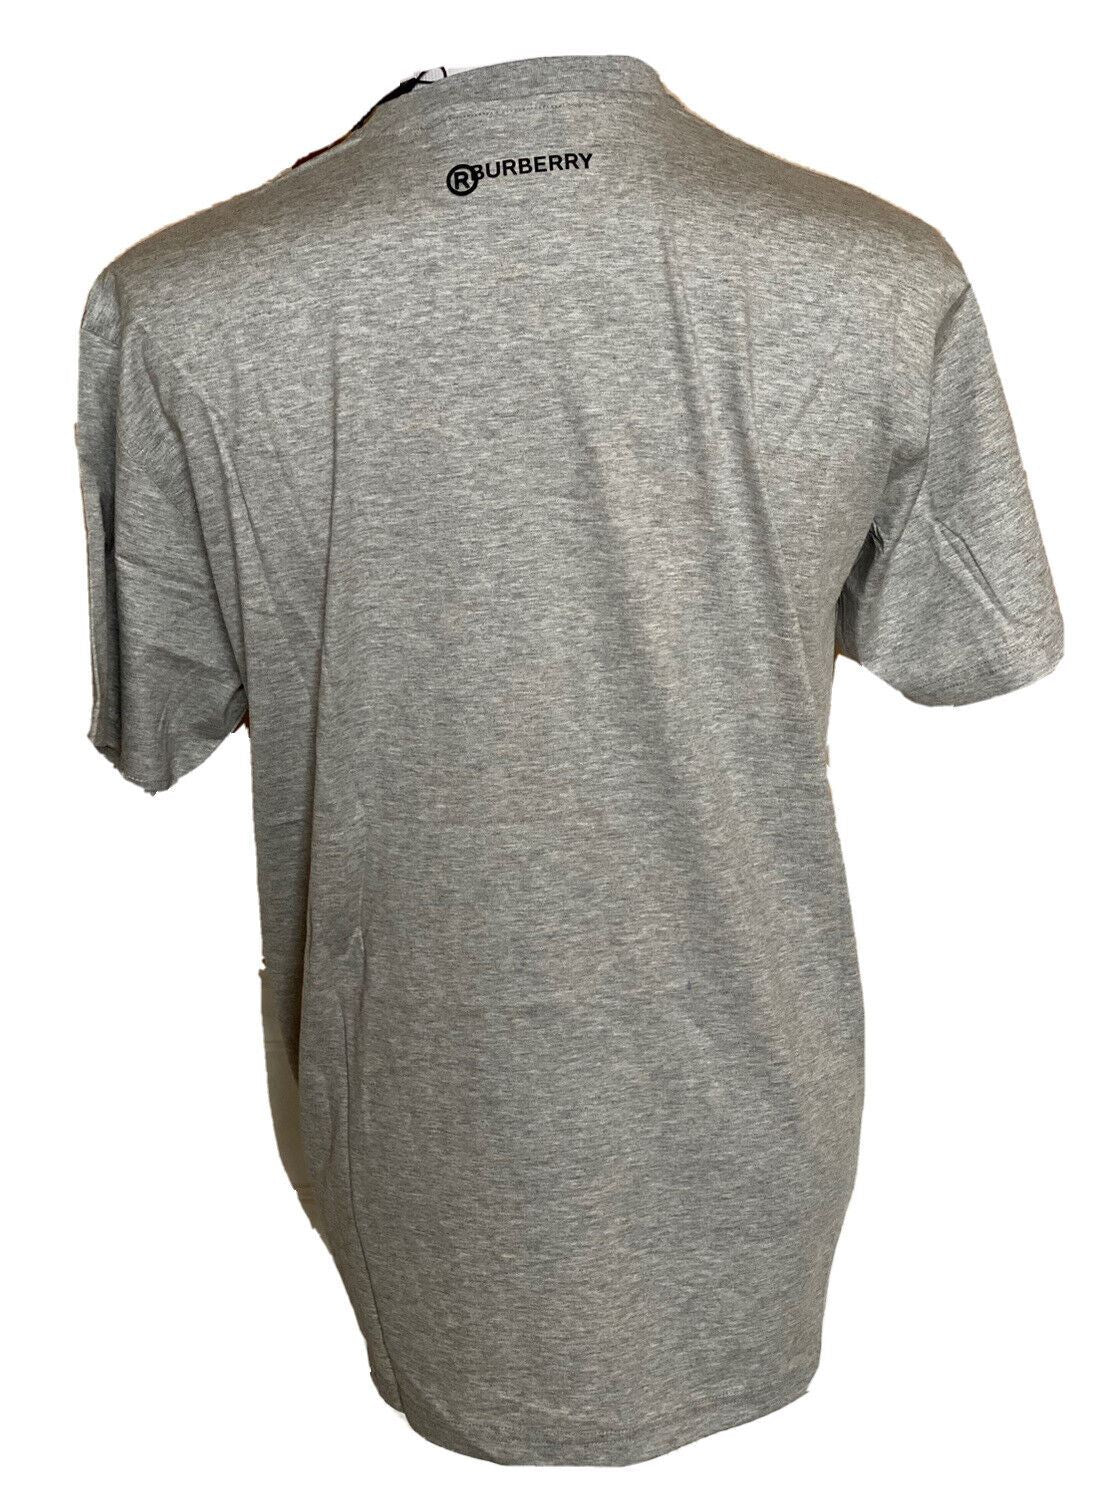 NWT $480 Burberry Sayers Gray Swan Print Cotton T-shirt M (Oversized) Portugal